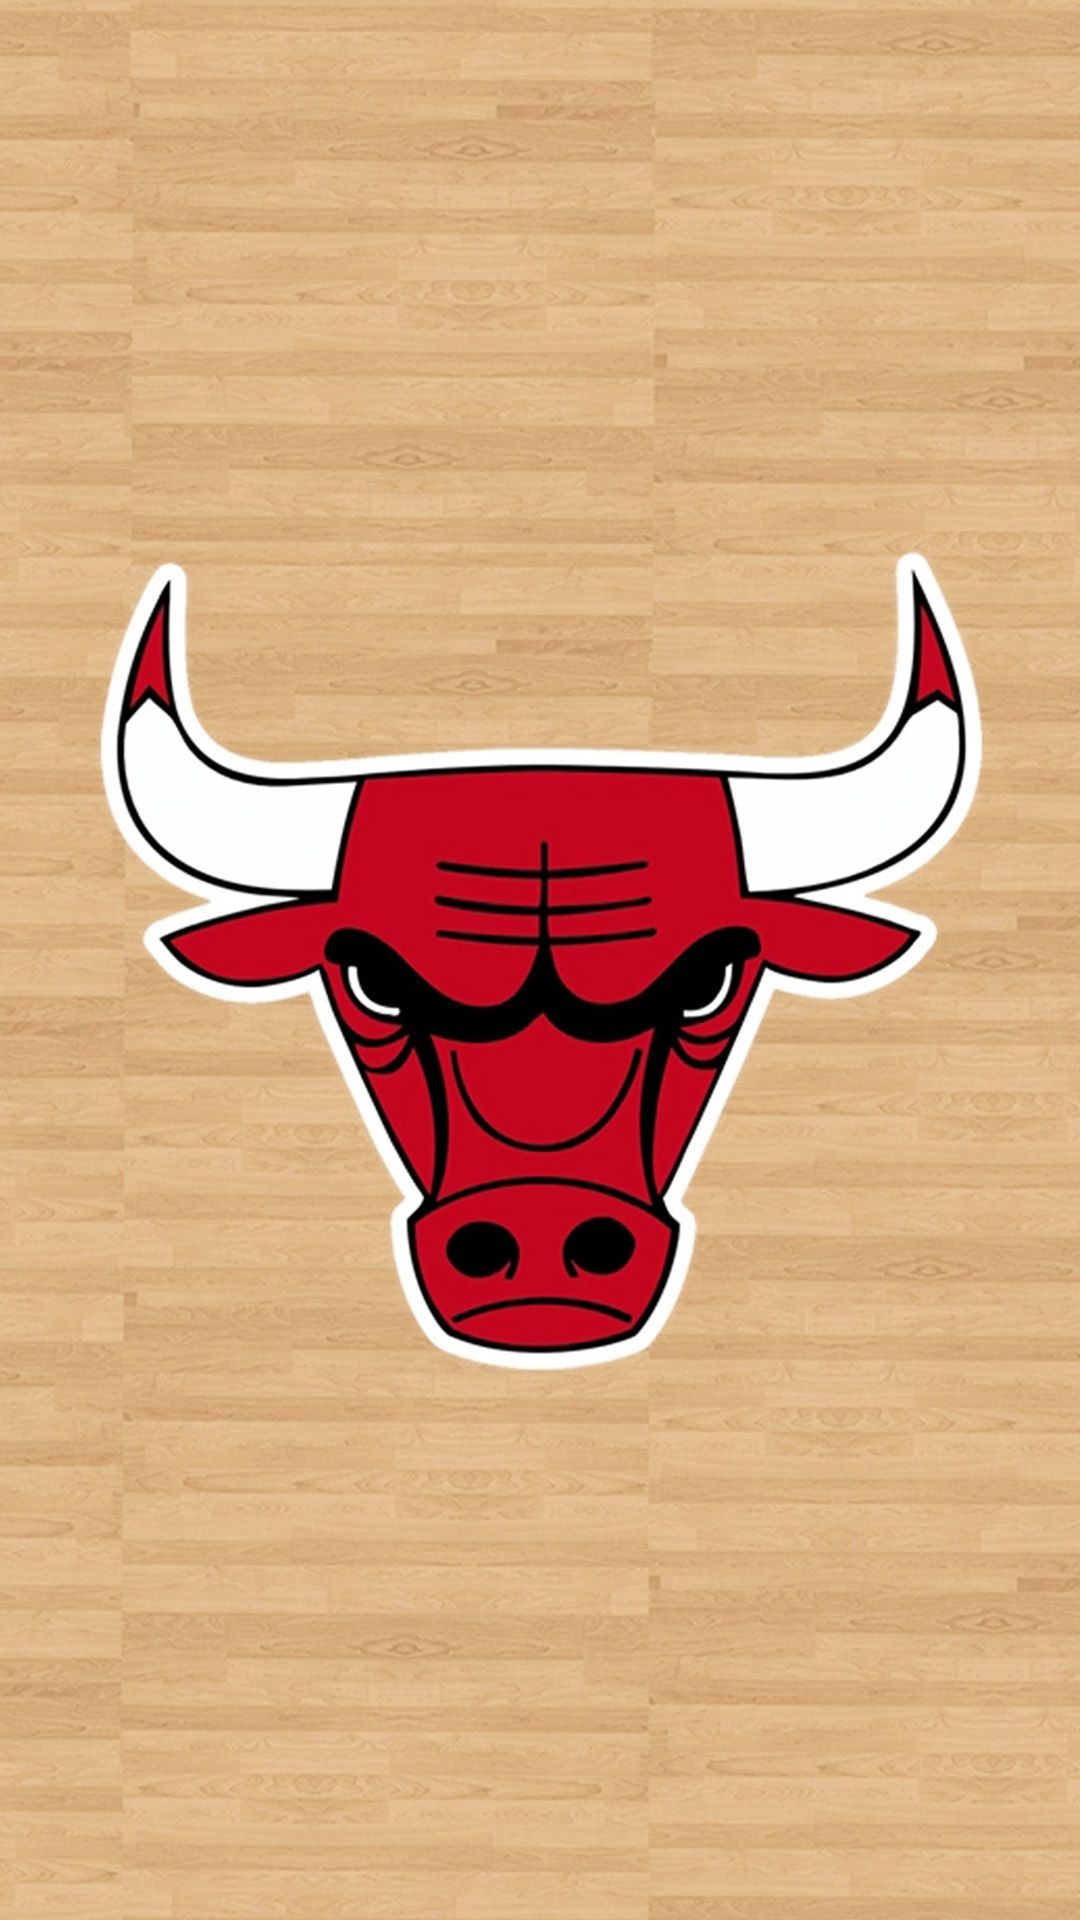 Chicago Bulls: The team defeated the Clyde Drexler-led Portland Trail Blazers in the 1992 NBA Finals. 1080x1920 Full HD Background.